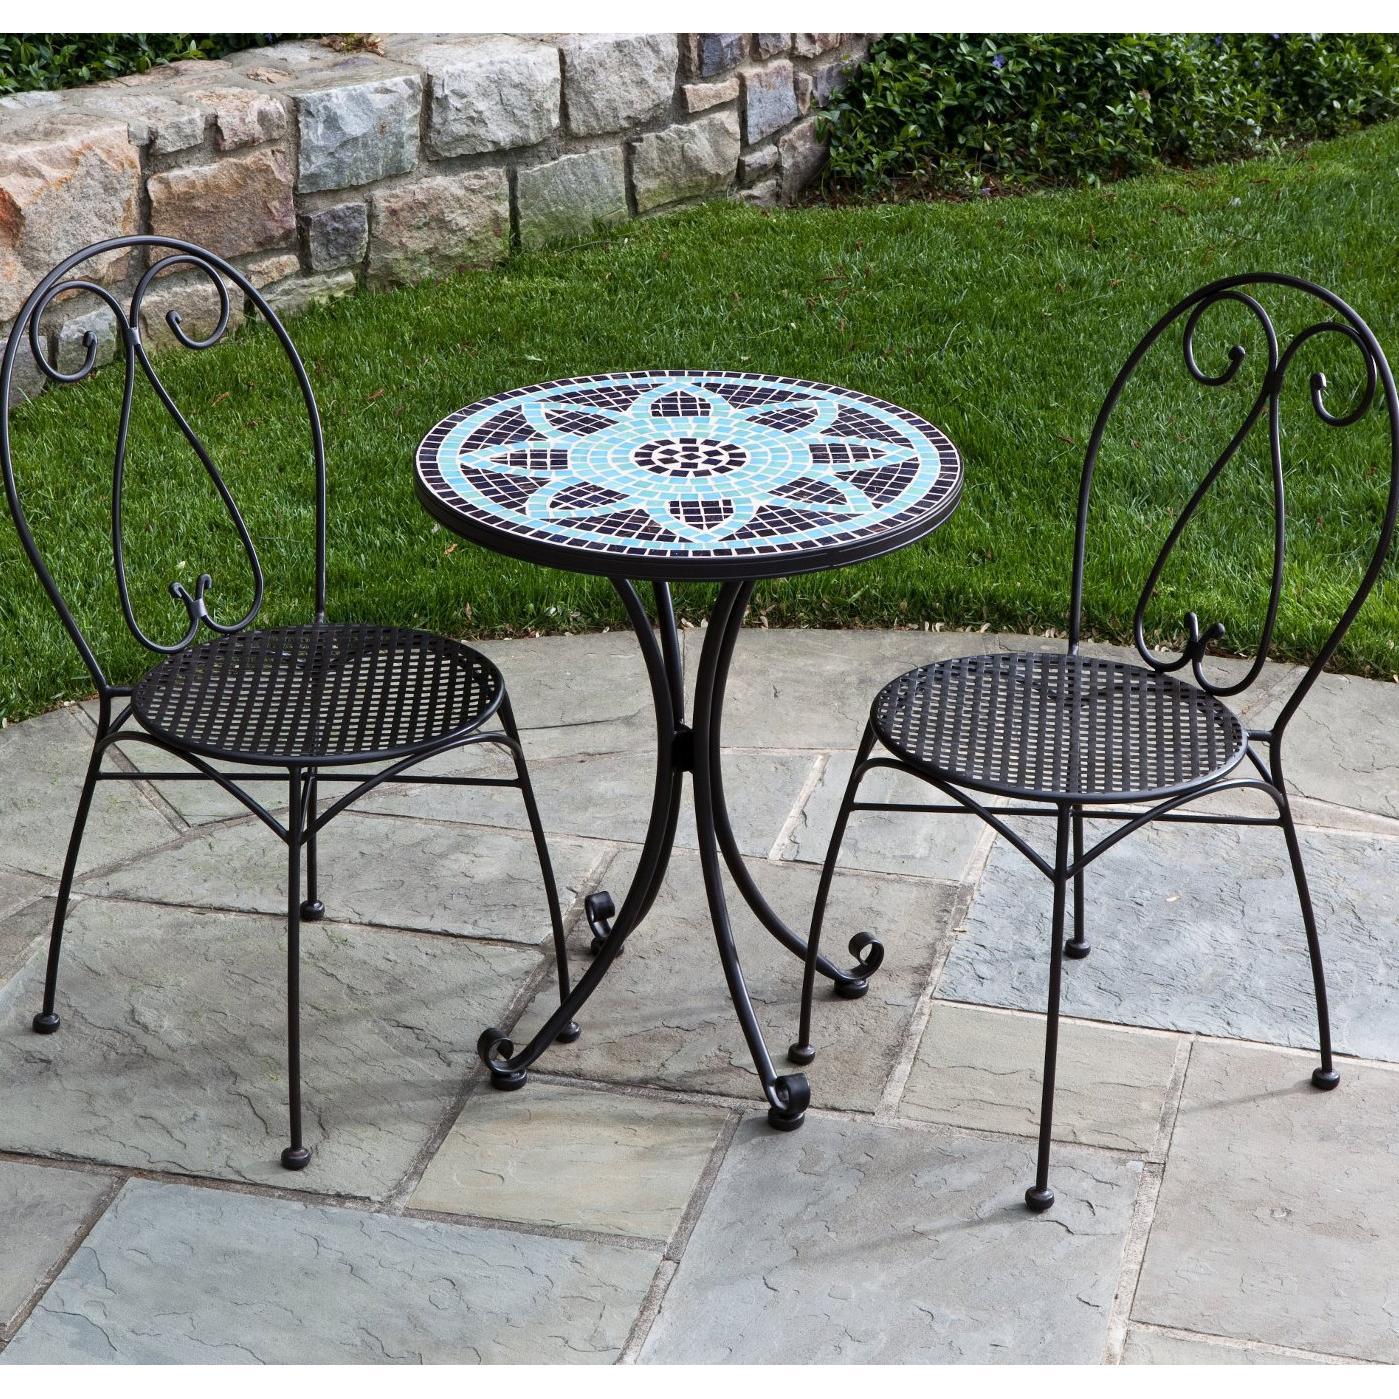 Make use of the bistro patio set to have comfort look